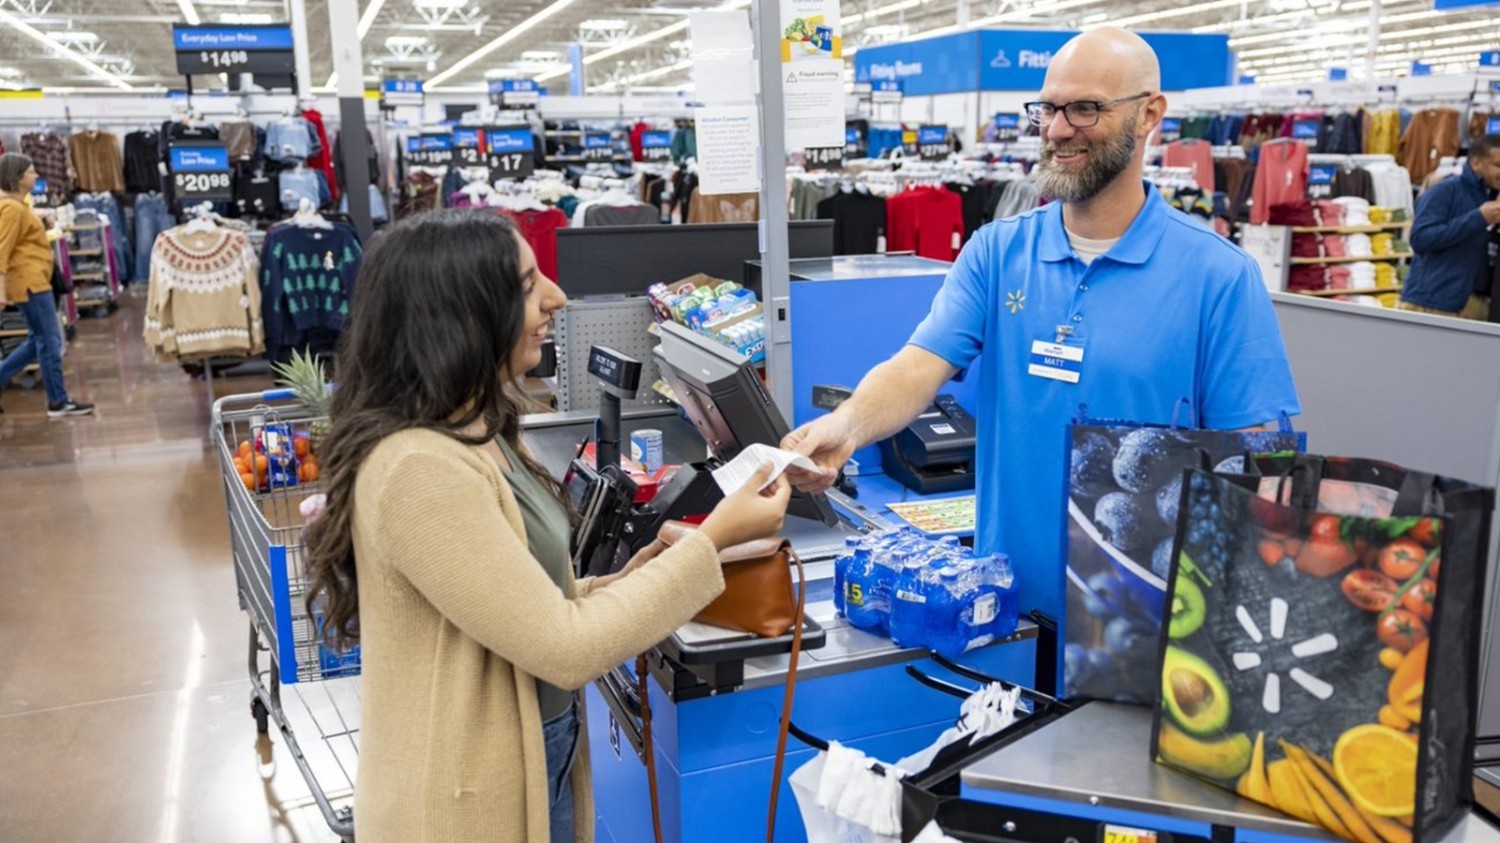 Walmart Canada supporting employee enrichment, well-being by